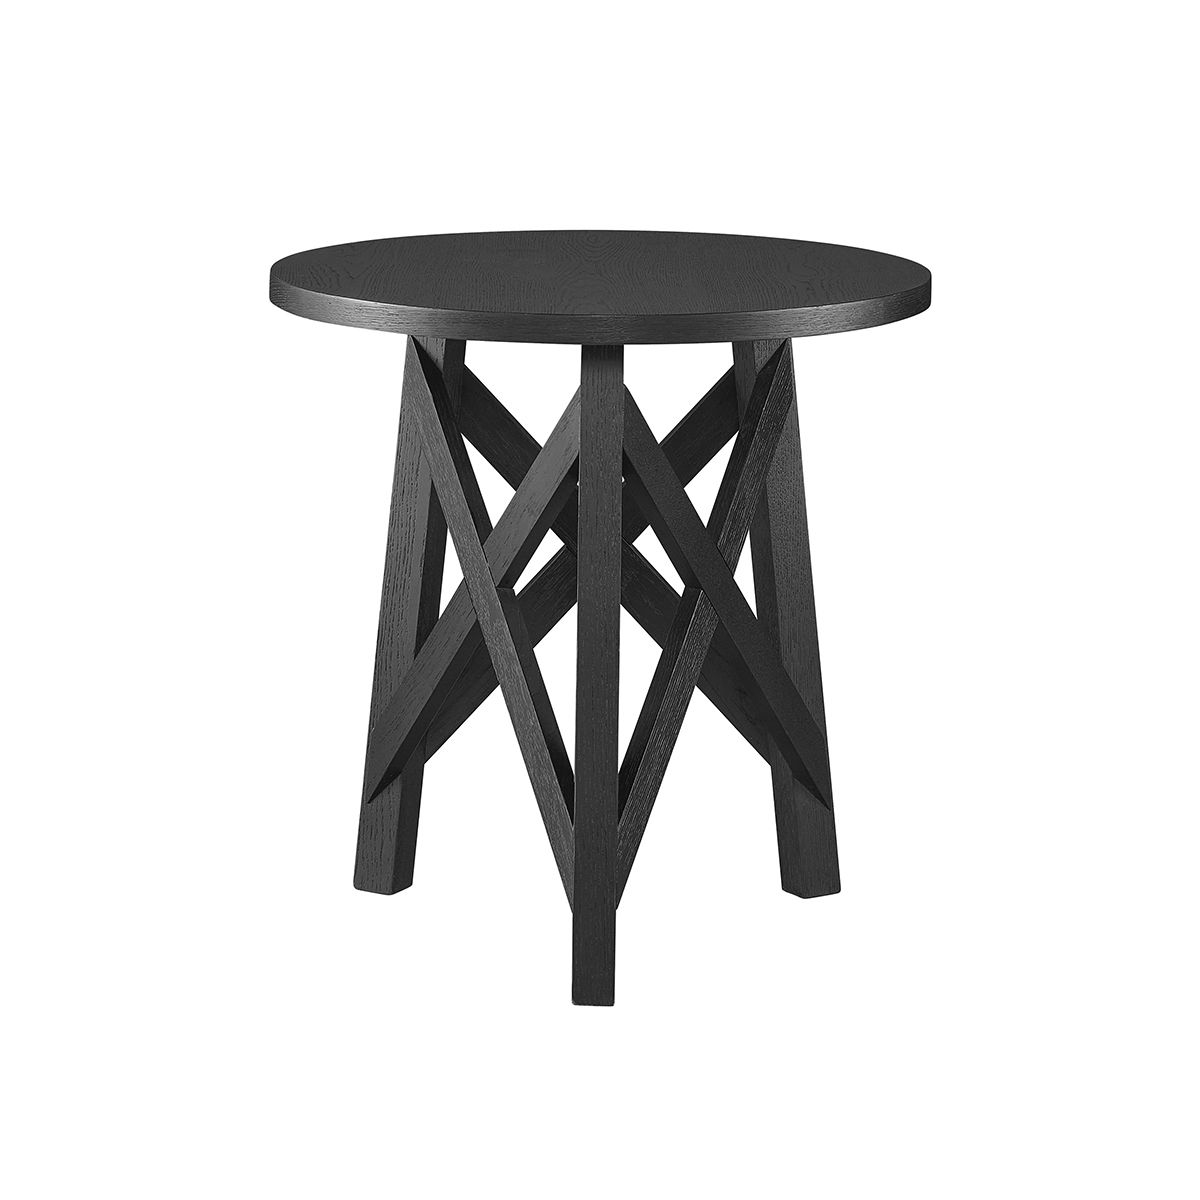 Picture of CRICKET TABLE-CHARCOAL